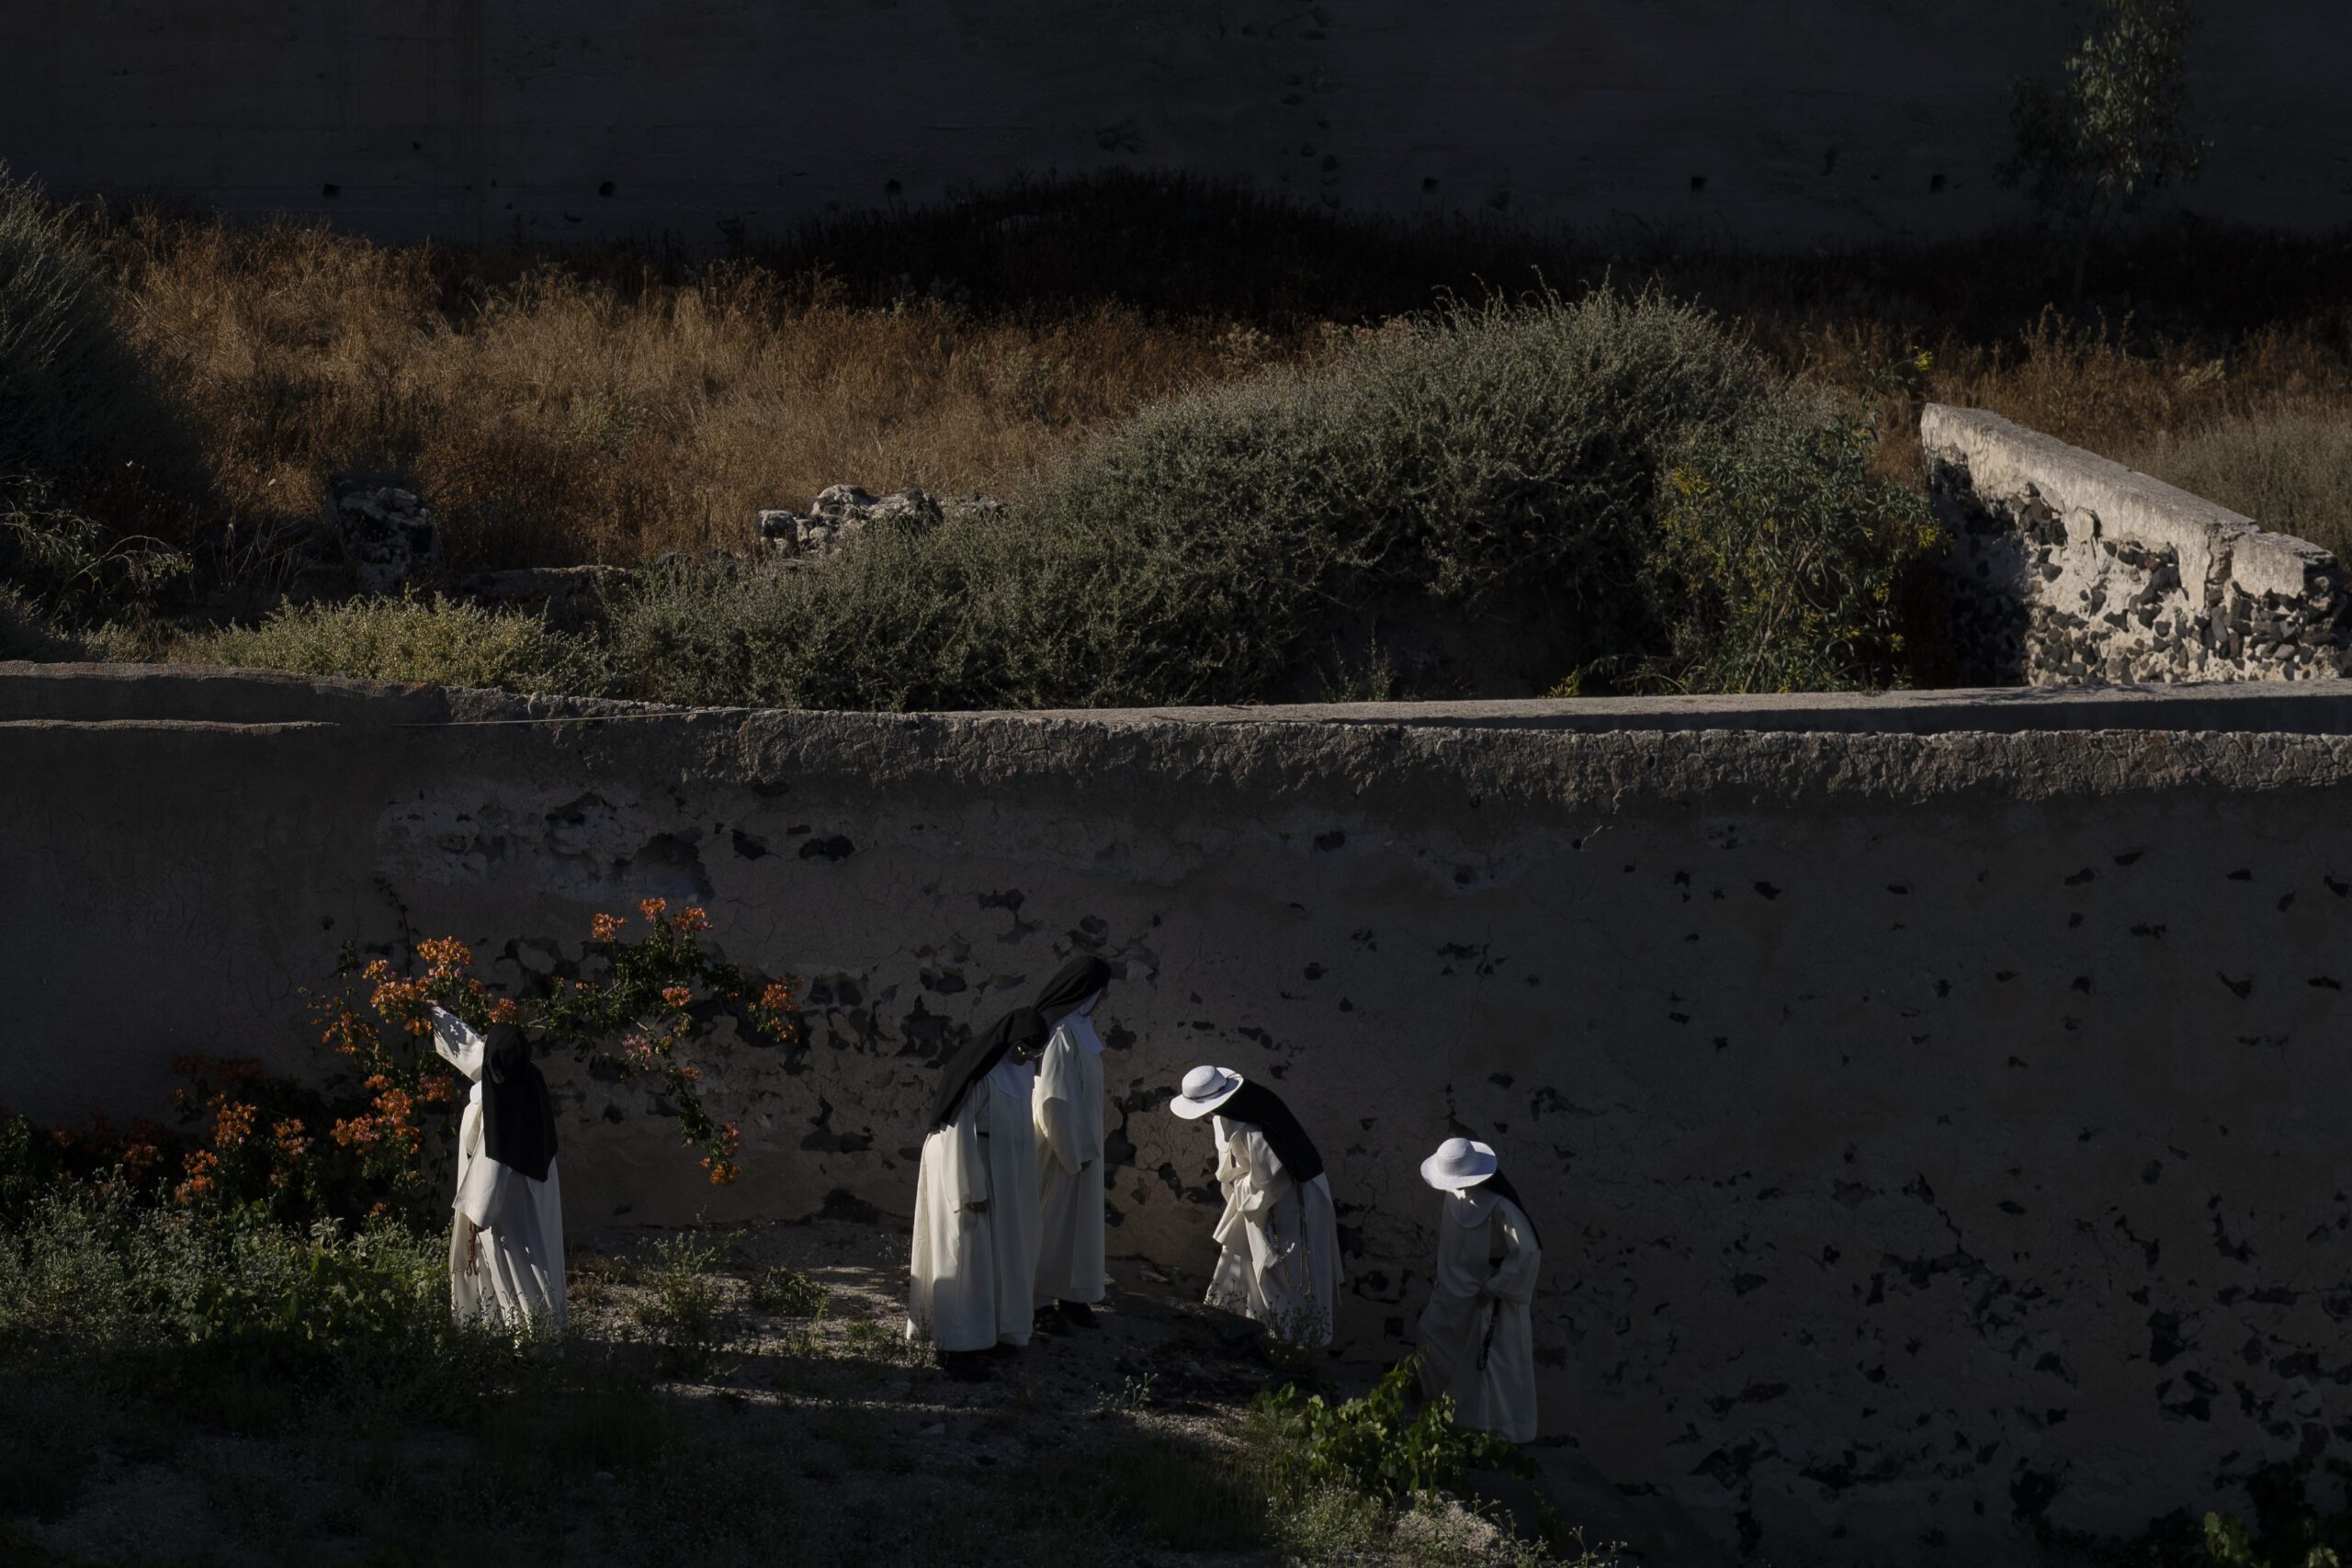 Cloistered nuns walk in the garden of the Catholic Monastery of St. Catherine on the Greek island of Santorini on Wednesday, June 15, 2022. When not praying in church or practicing sacred music and hymns, the nuns tend to the garden, where they grow fruits and vegetables. (AP Photo/Petros Giannakouris)